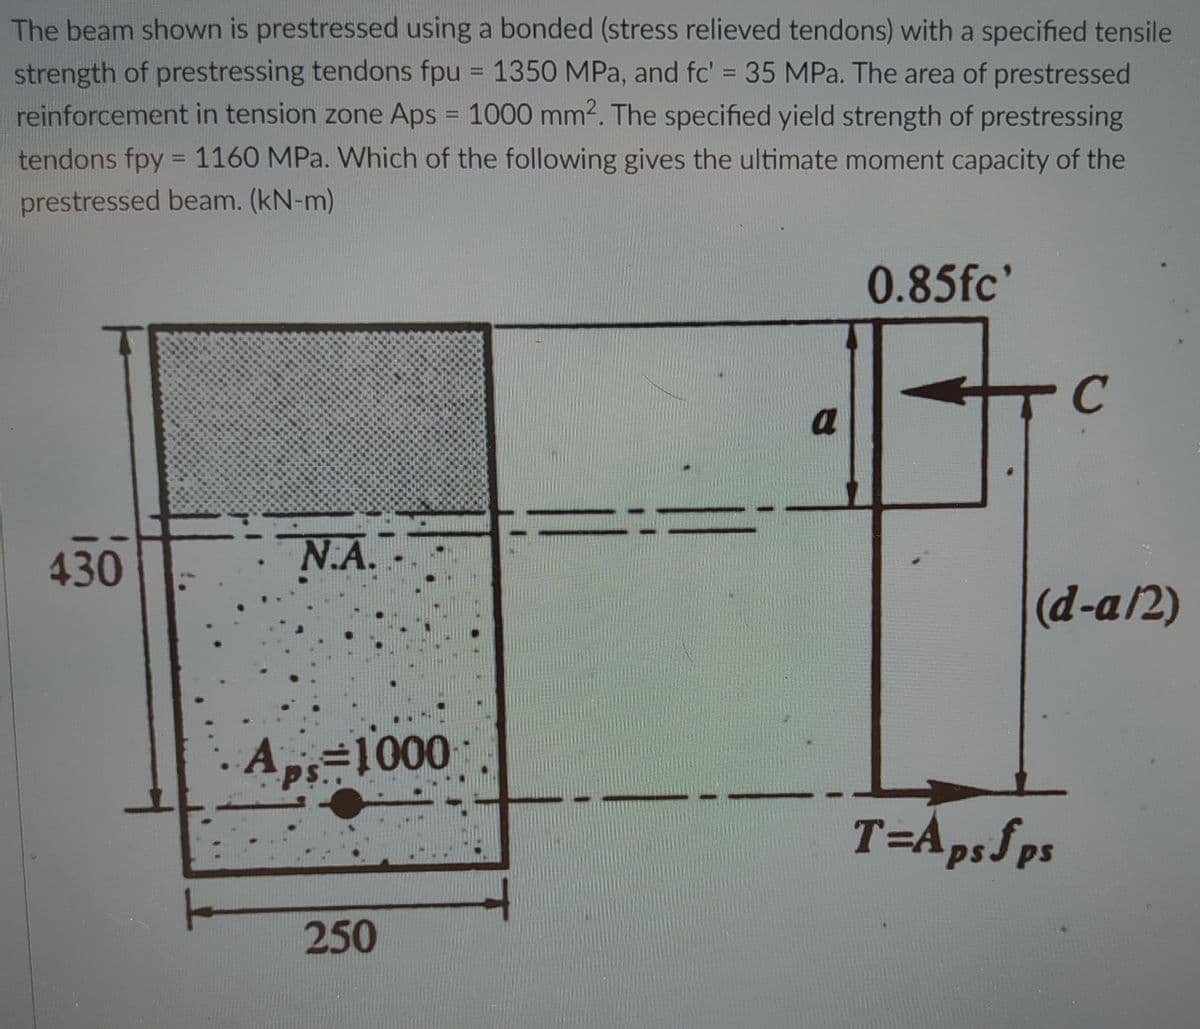 The beam shown is prestressed using a bonded (stress relieved tendons) with a specified tensile
strength of prestressing tendons fpu = 1350 MPa, and fc' = 35 MPa. The area of prestressed
reinforcement in tension zone Aps = 1000 mm2. The specified yield strength of prestressing
%3D
%3D
tendons fpy = 1160 MPa. Which of the following gives the ultimate moment capacity of the
%3D
prestressed beam. (kN-m)
0.85fc'
a
430
N.A.
(d-a/2)
A=1000
%3D1000
T=Ap, ps
250
